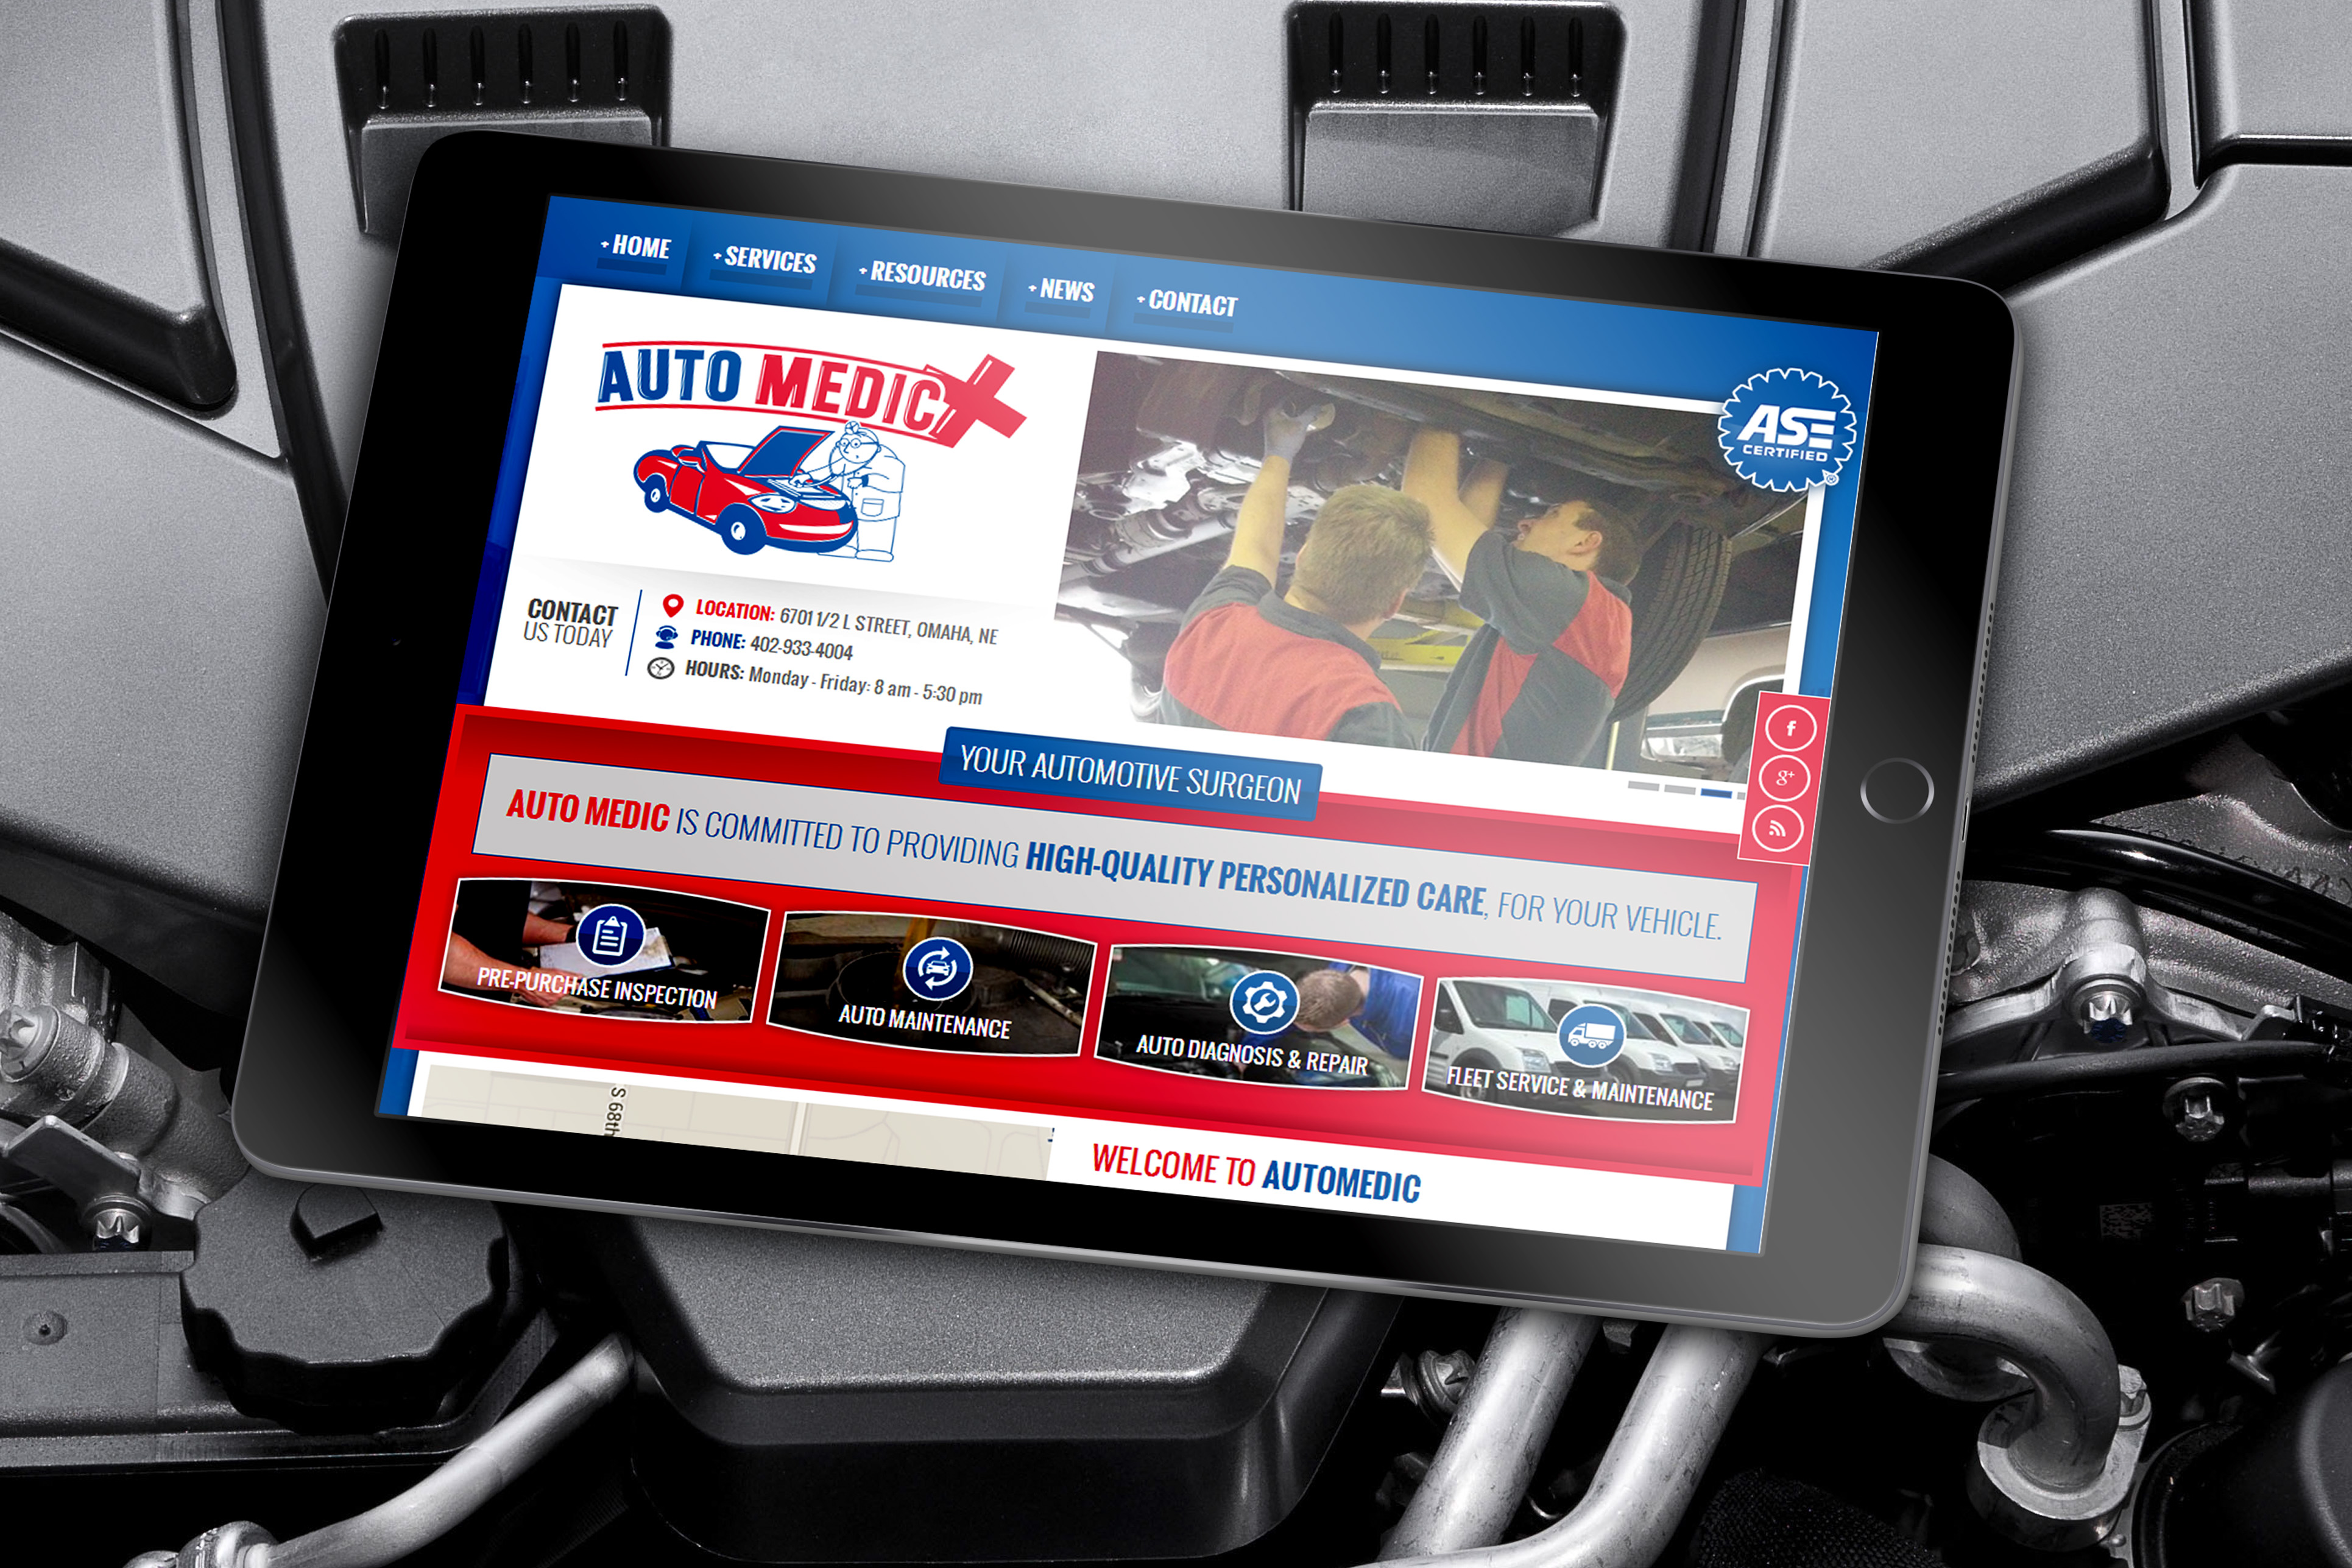 Website Design example by Mosaic Visuals Design in Omaha, NE for Auto Medic